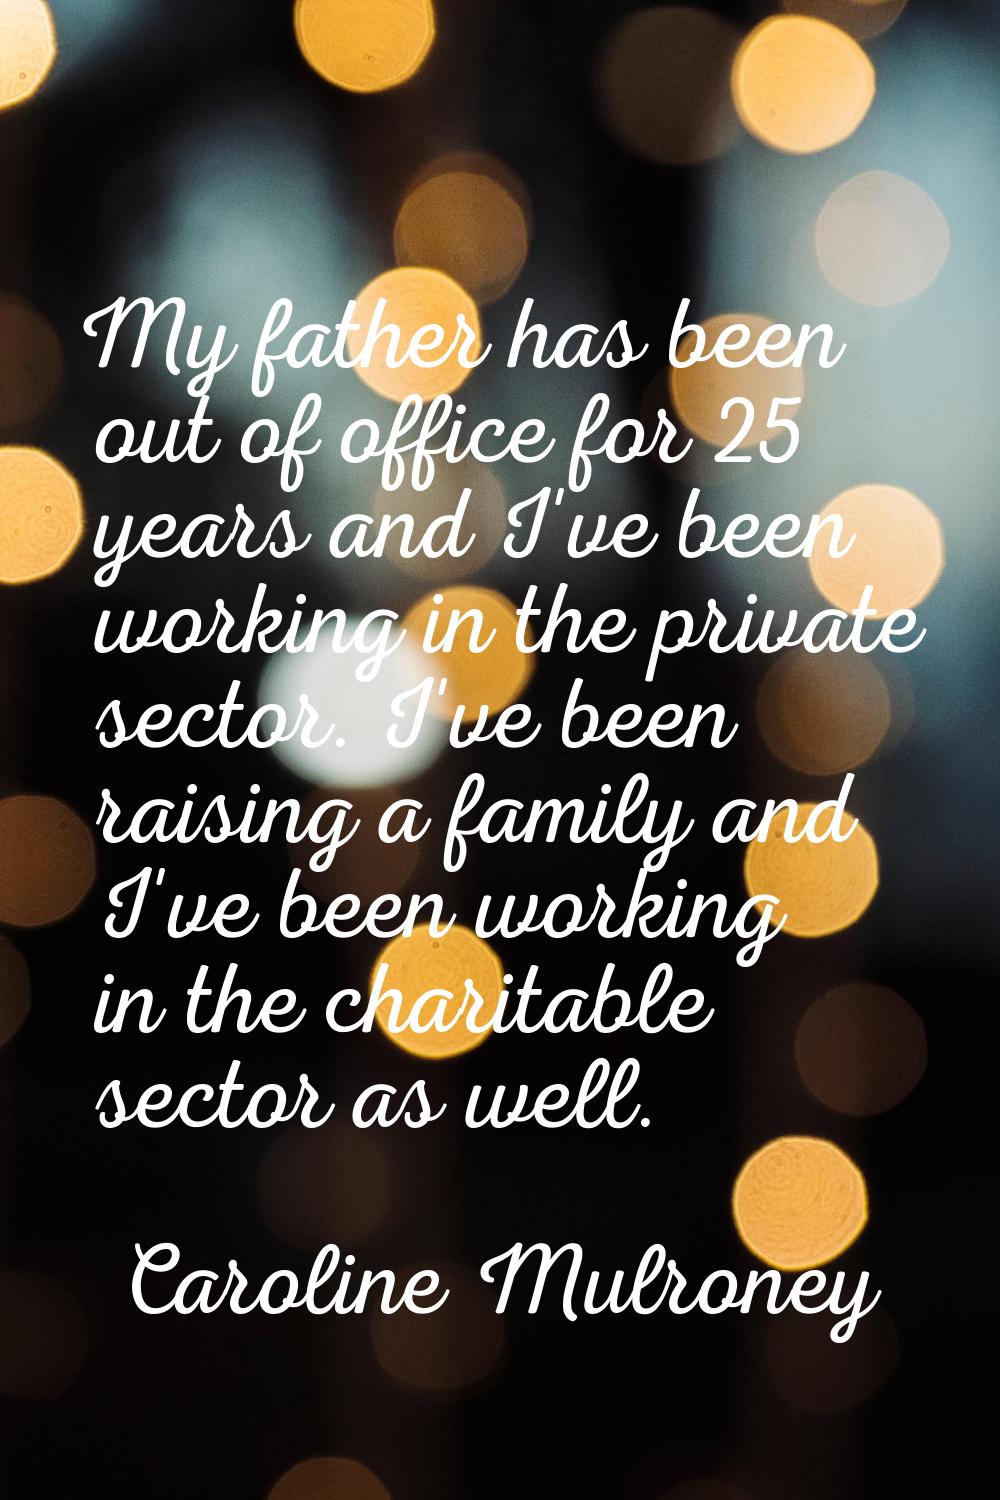 My father has been out of office for 25 years and I've been working in the private sector. I've bee